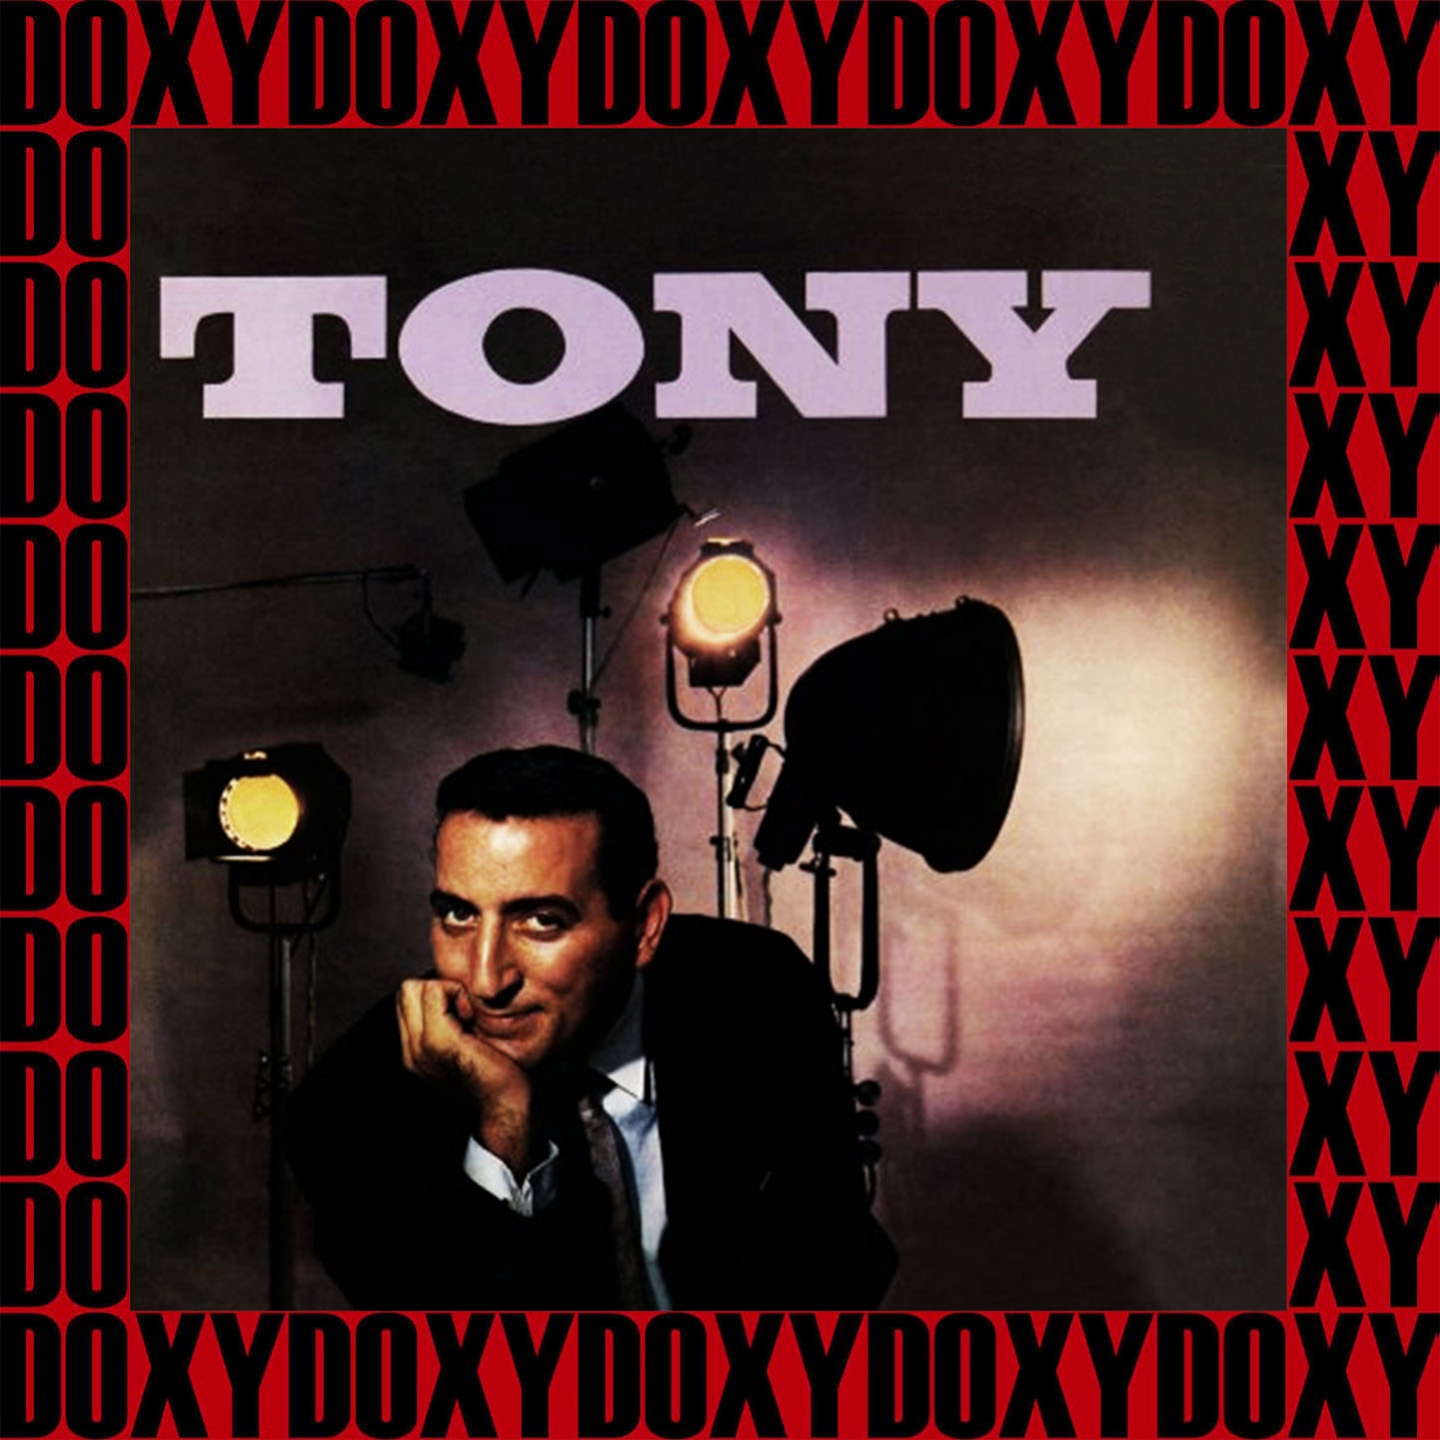 Tony (Remastered Version) (Doxy Collection)